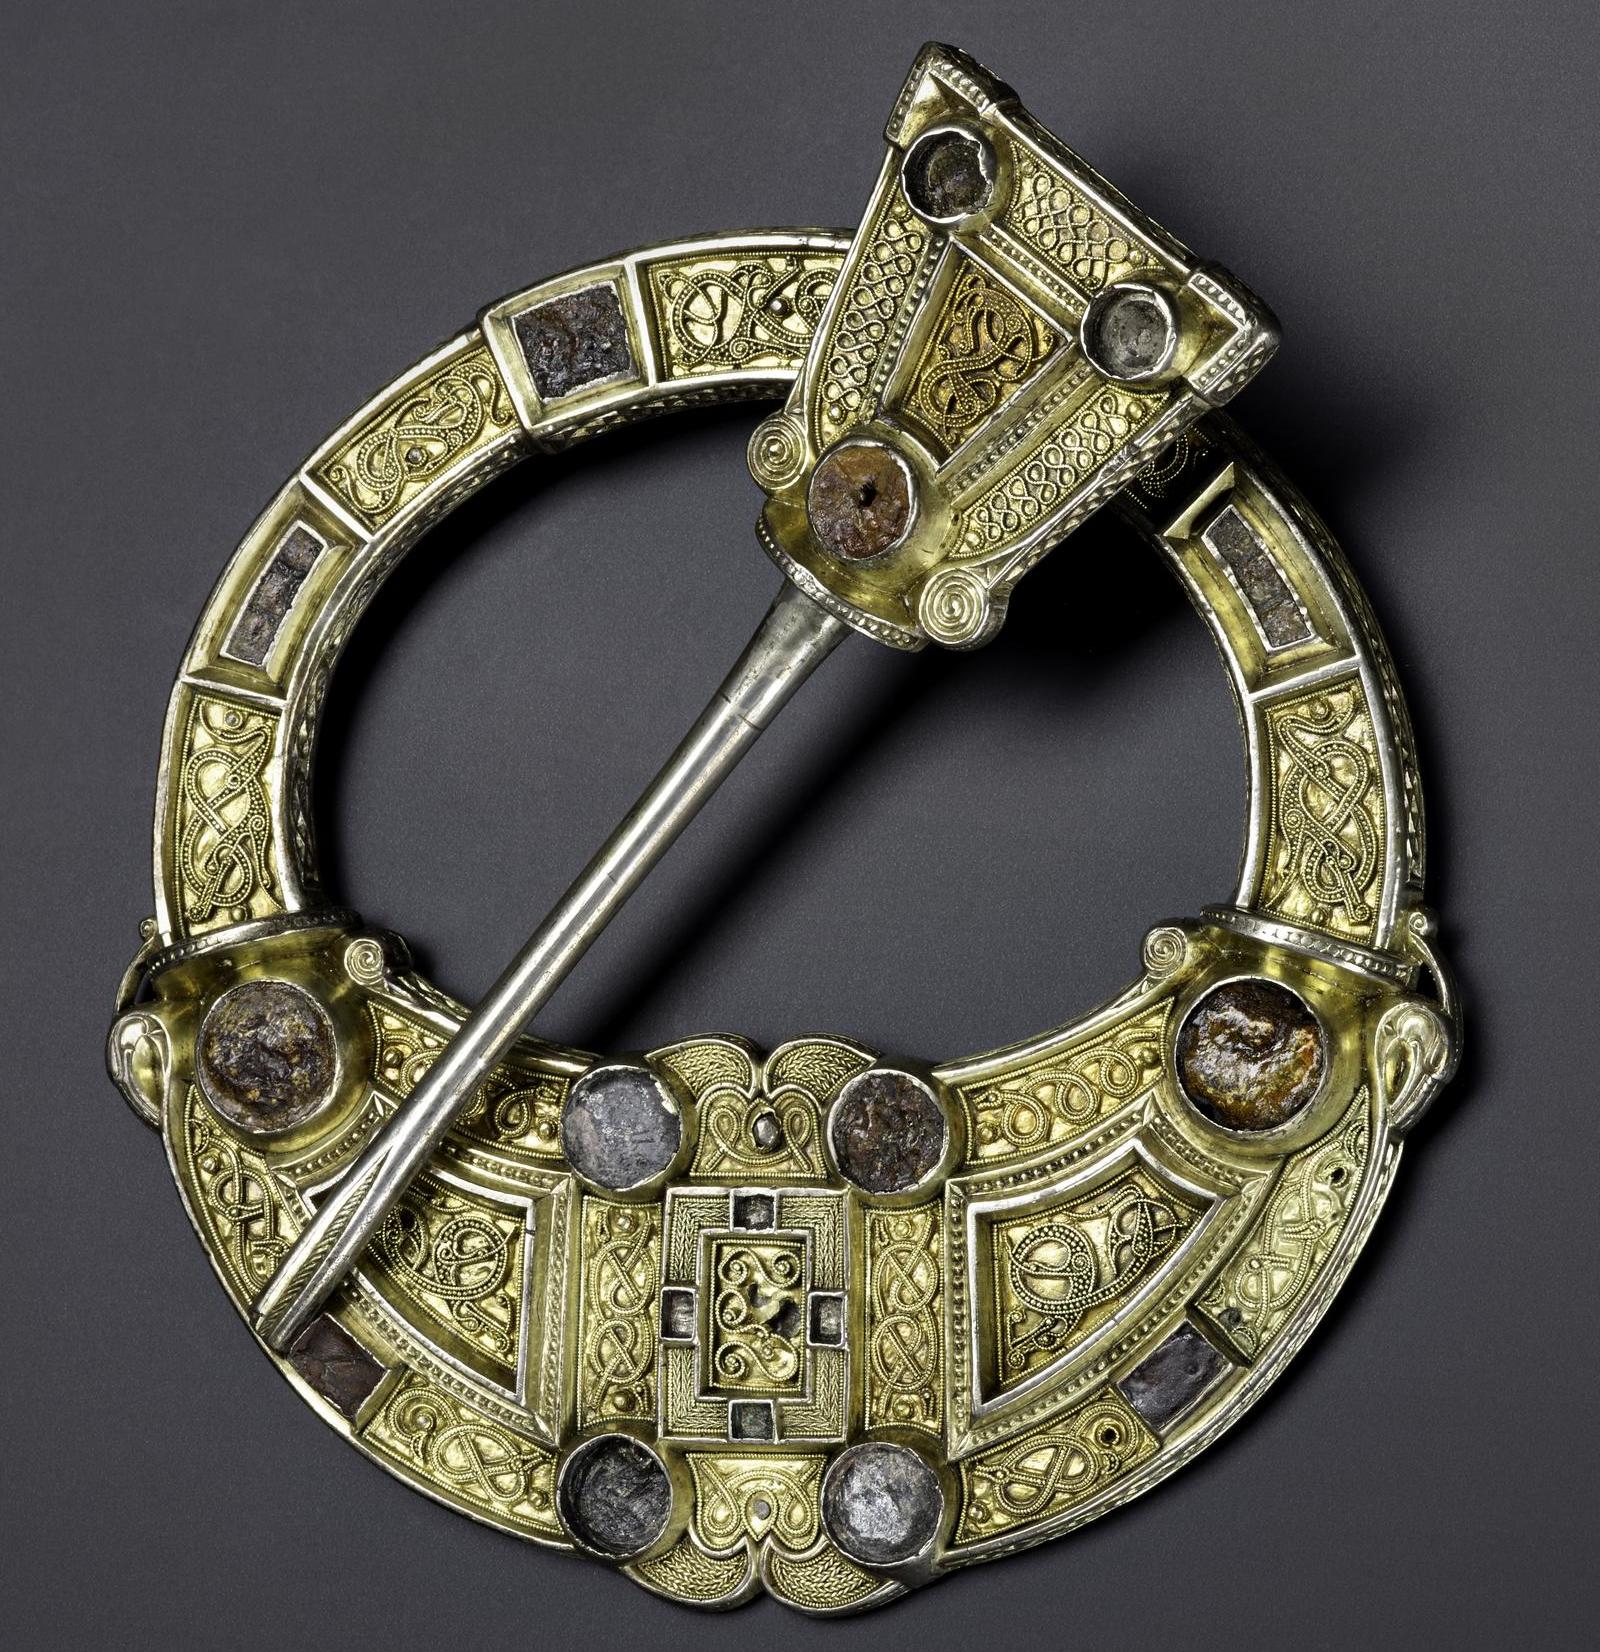 The Hunterston Brooch with panels of gold filigree in Celtic and Anglo-Saxon styles, from Ireland or the West of Scotland, c. 700 AD.jpg